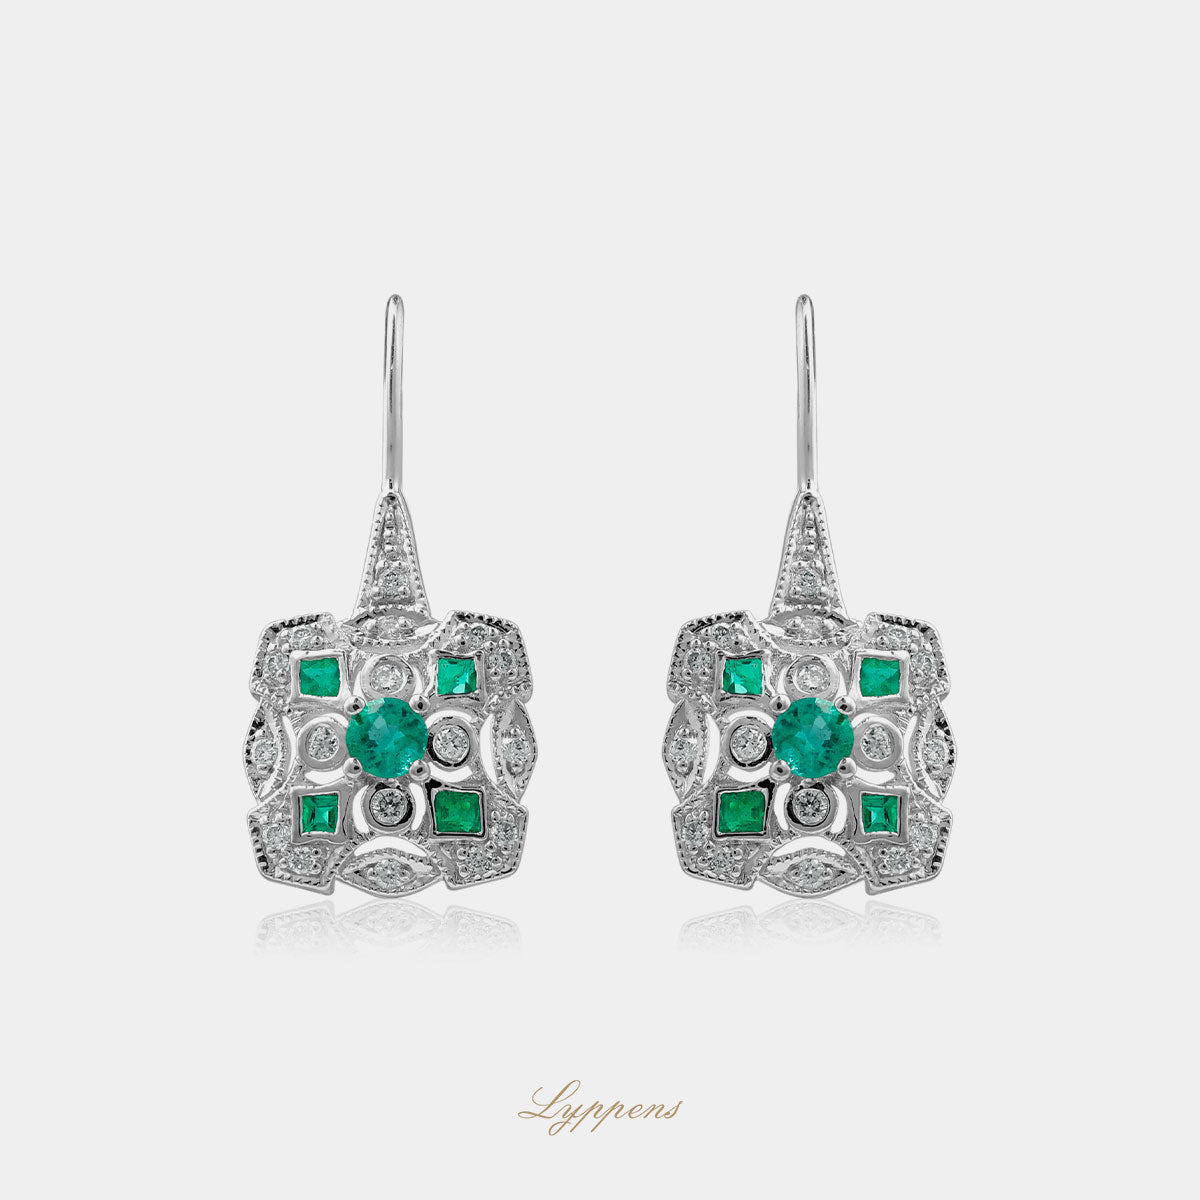 White gold drop earrings with emerald and diamonds